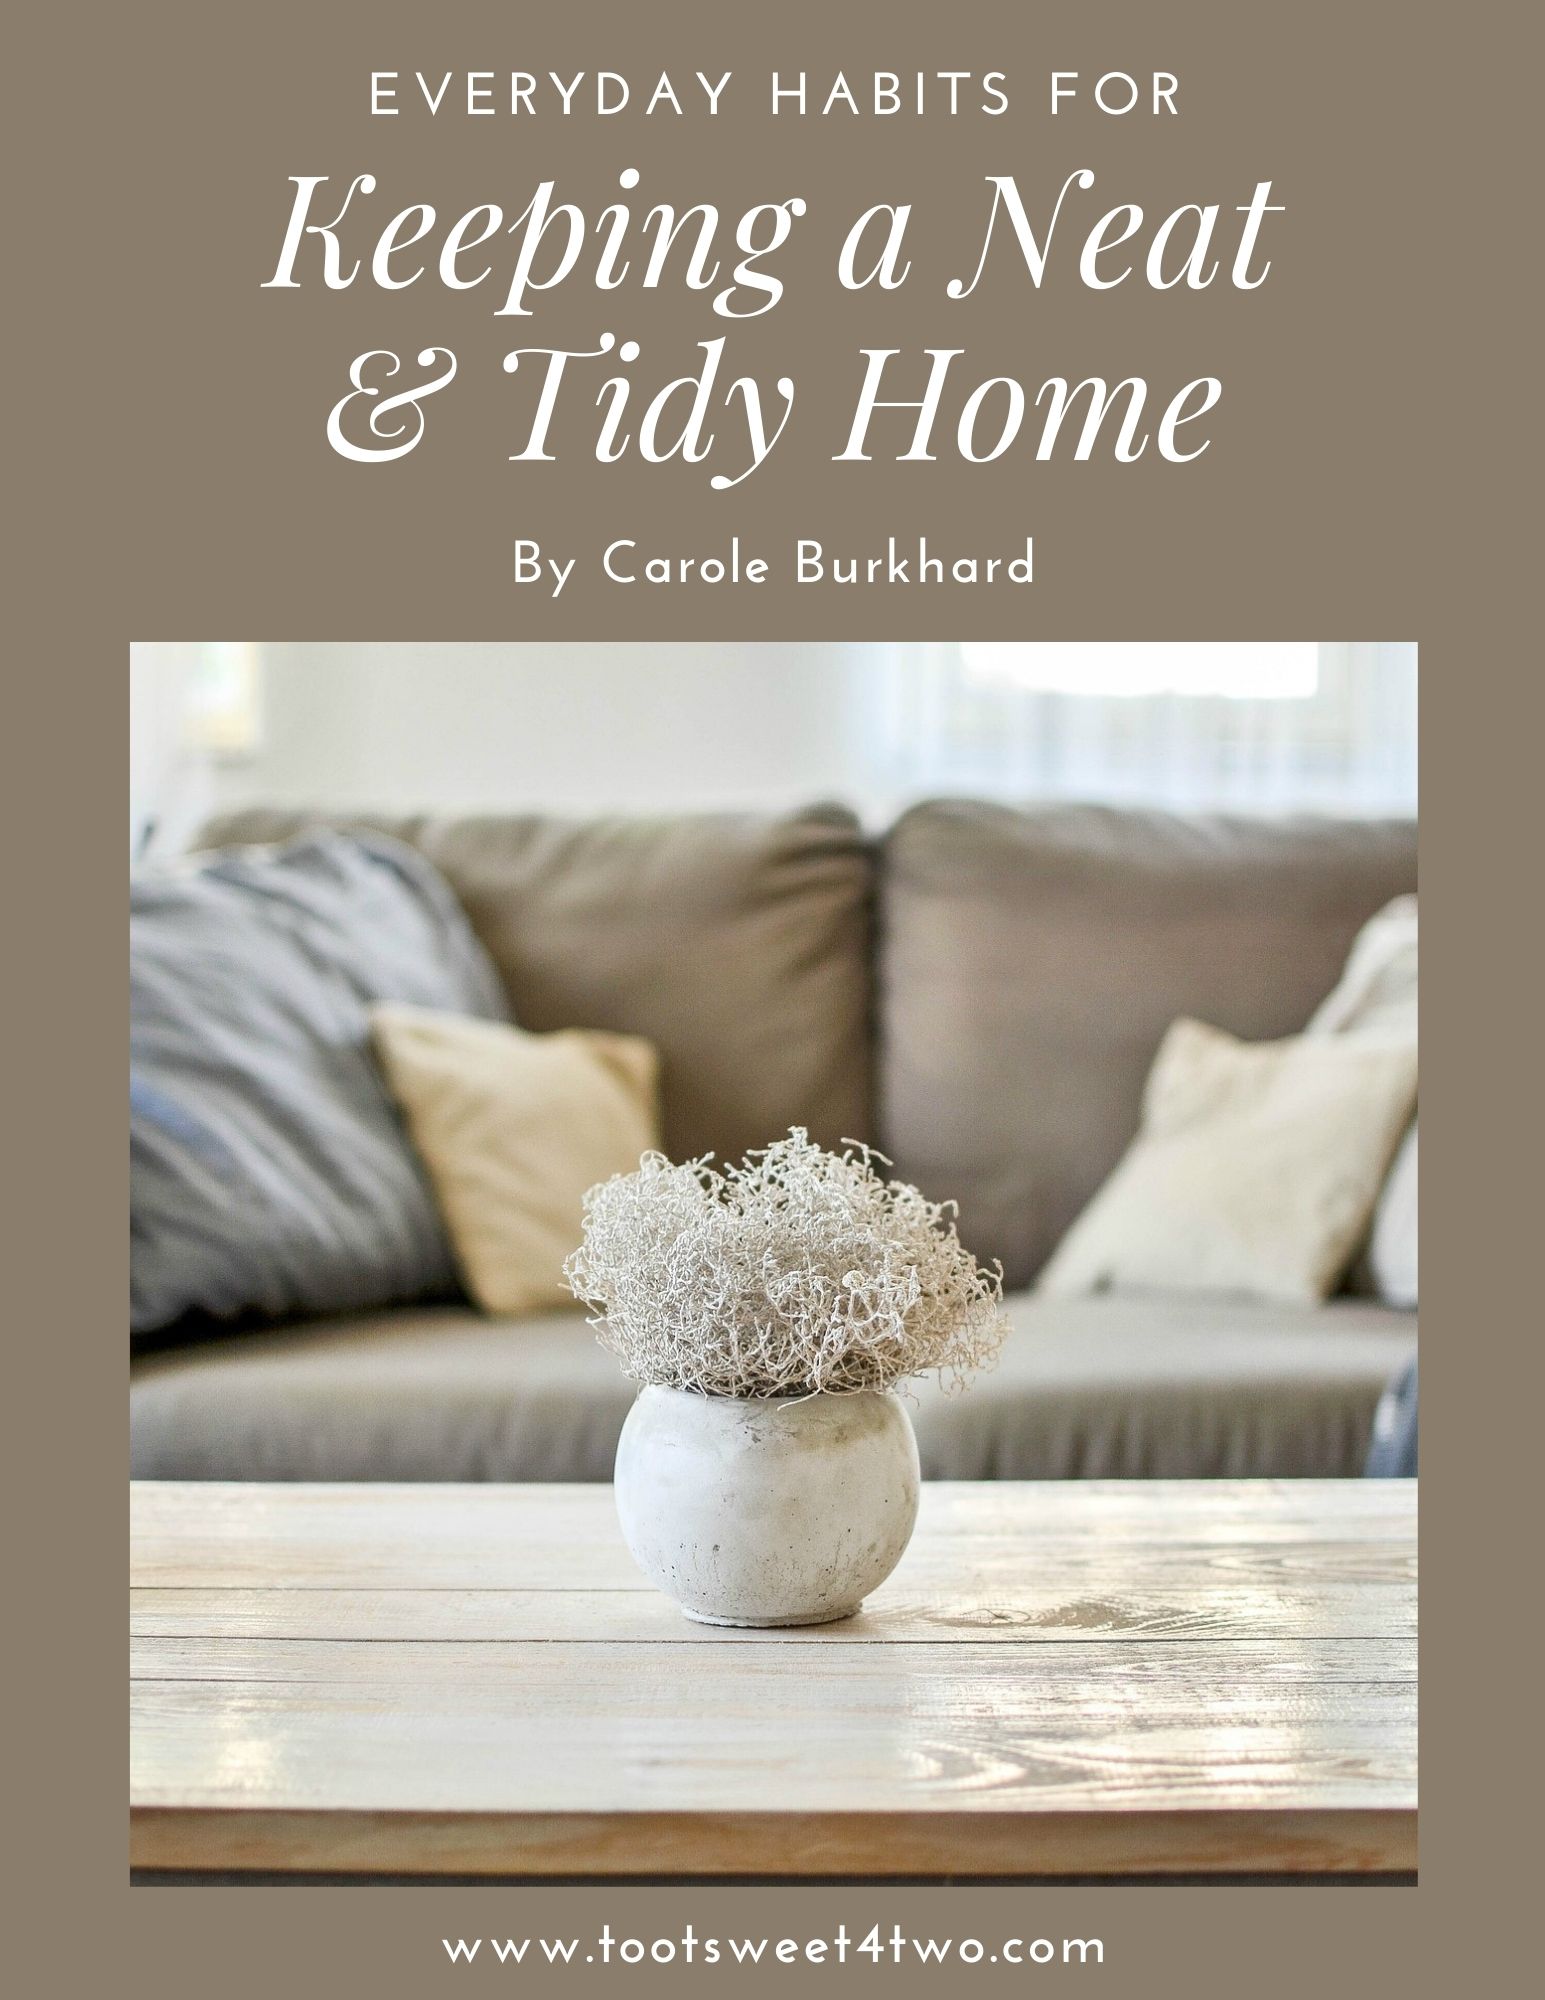 Cover image for everyday habits for keeping a neat & tidy home eBook.